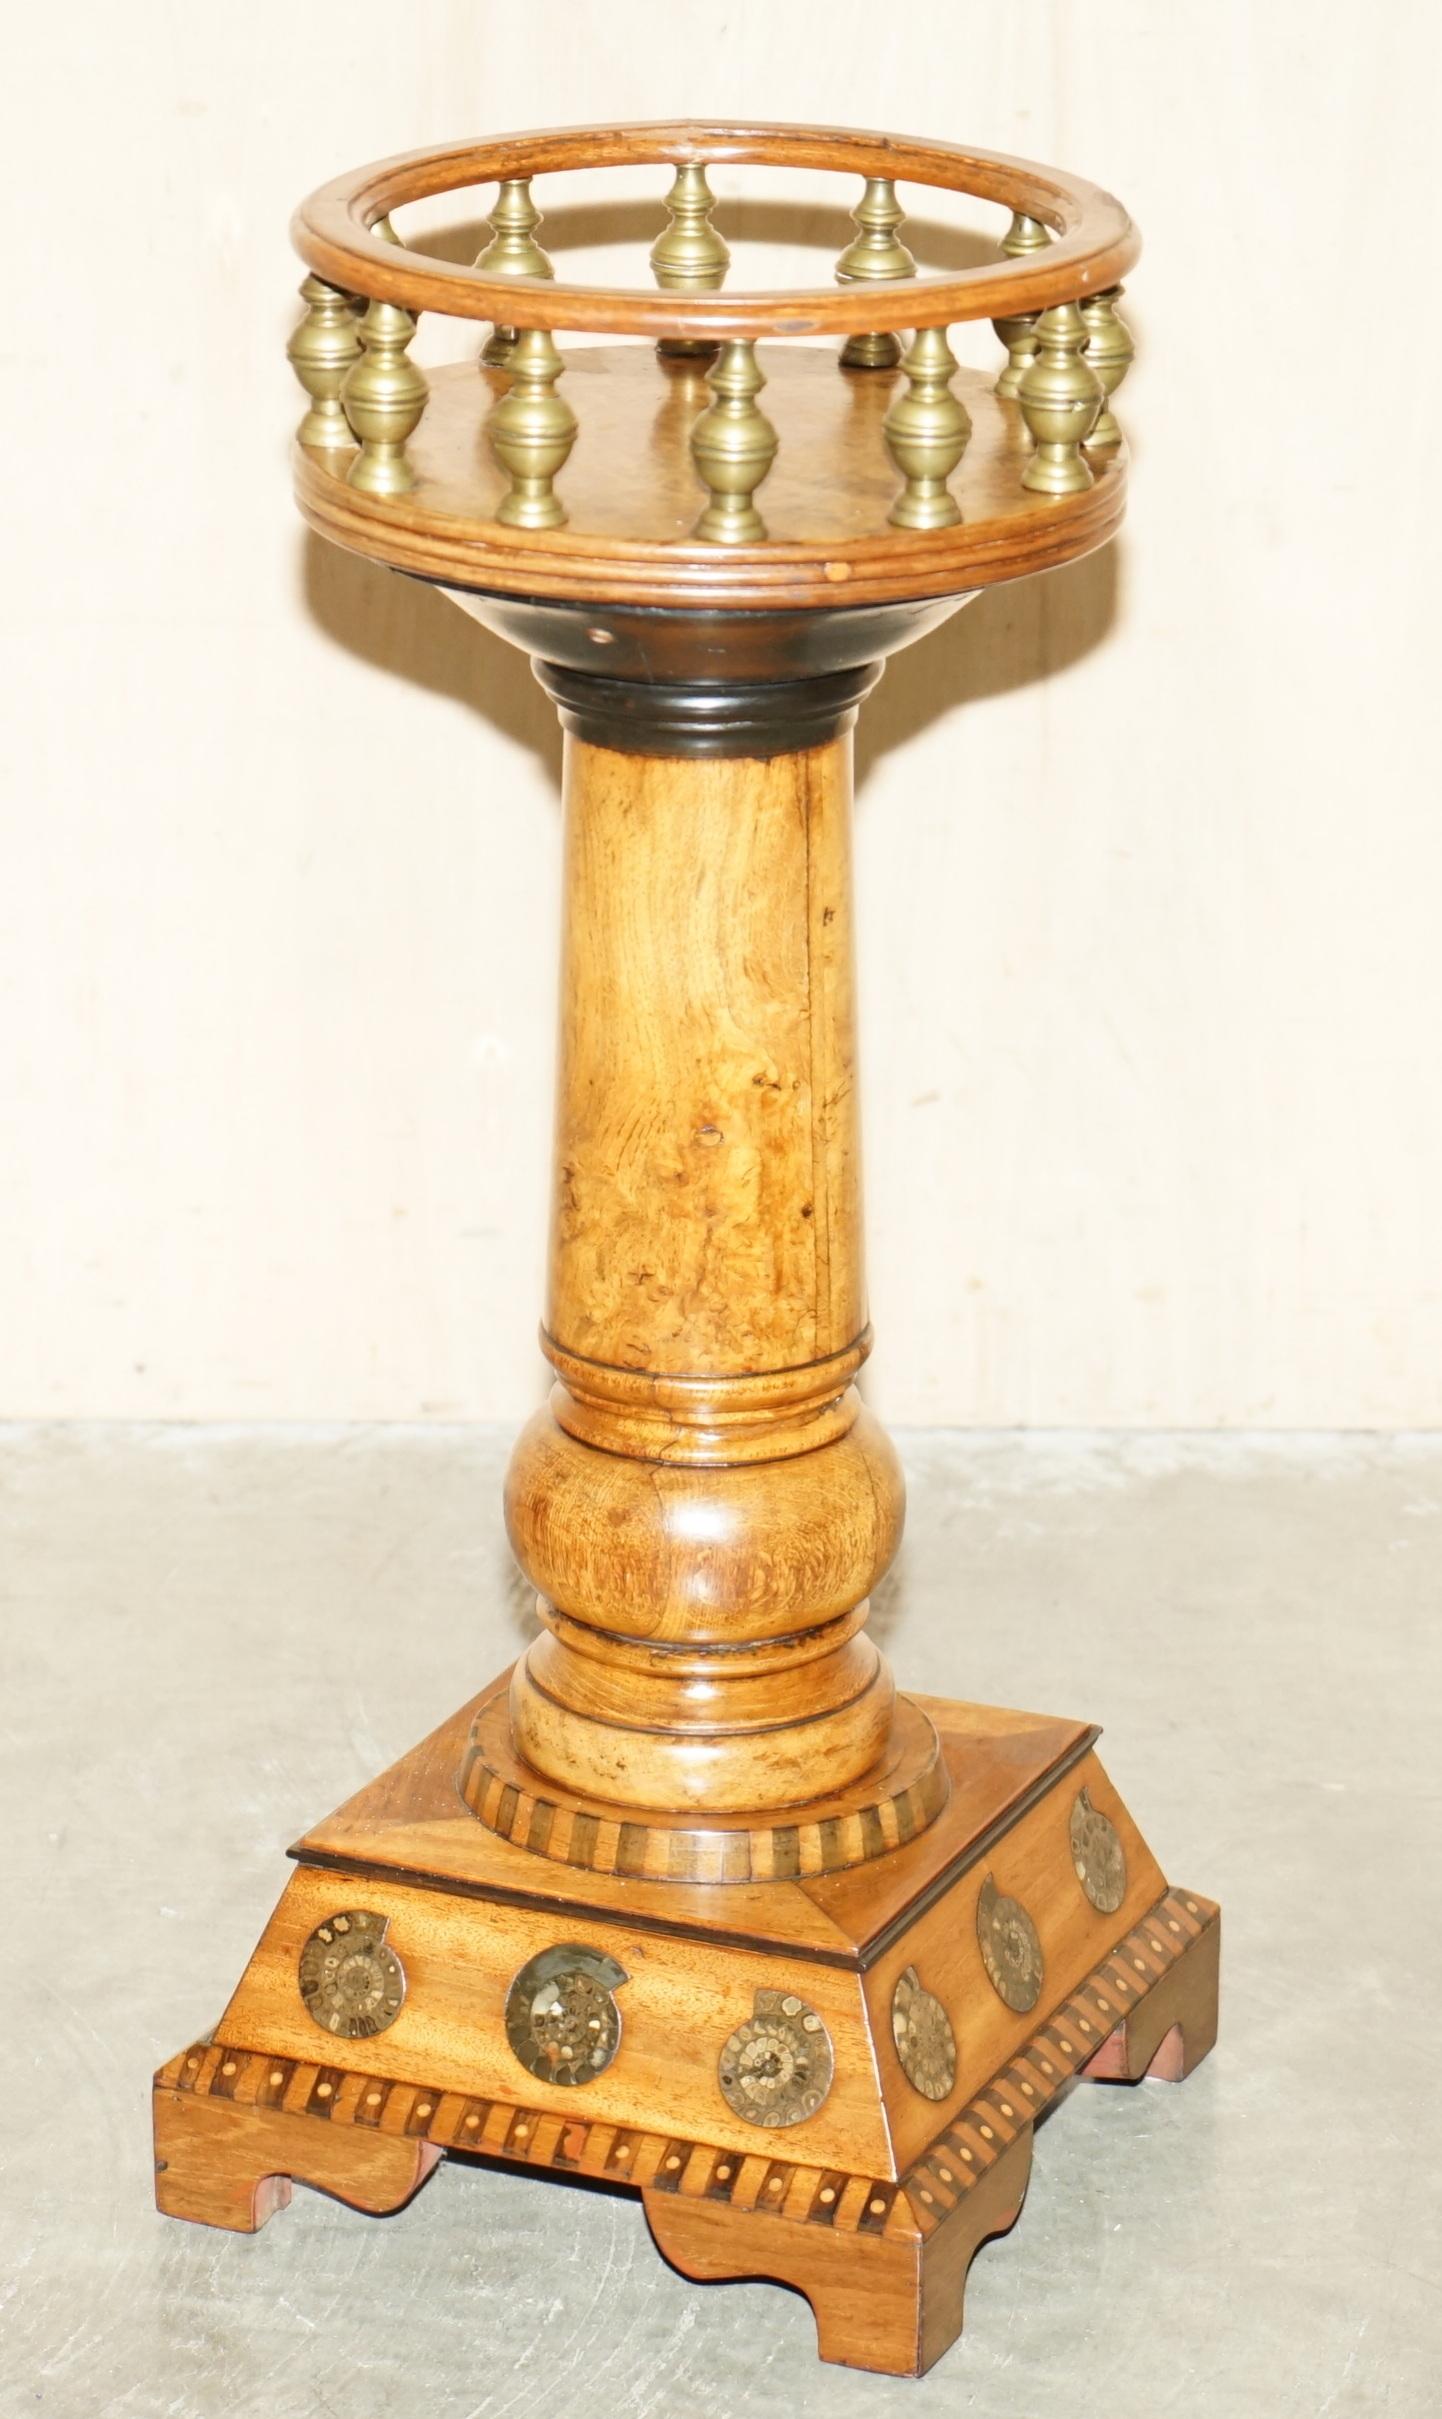 Royal House Antiques

Royal House Antiques is delighted to offer for sale this absolutely exquisite Antique Victorian Burr Oak Corinthian pillared pedestal with Ammonite Fossil inlay

Please note the delivery fee listed is just a guide, it covers